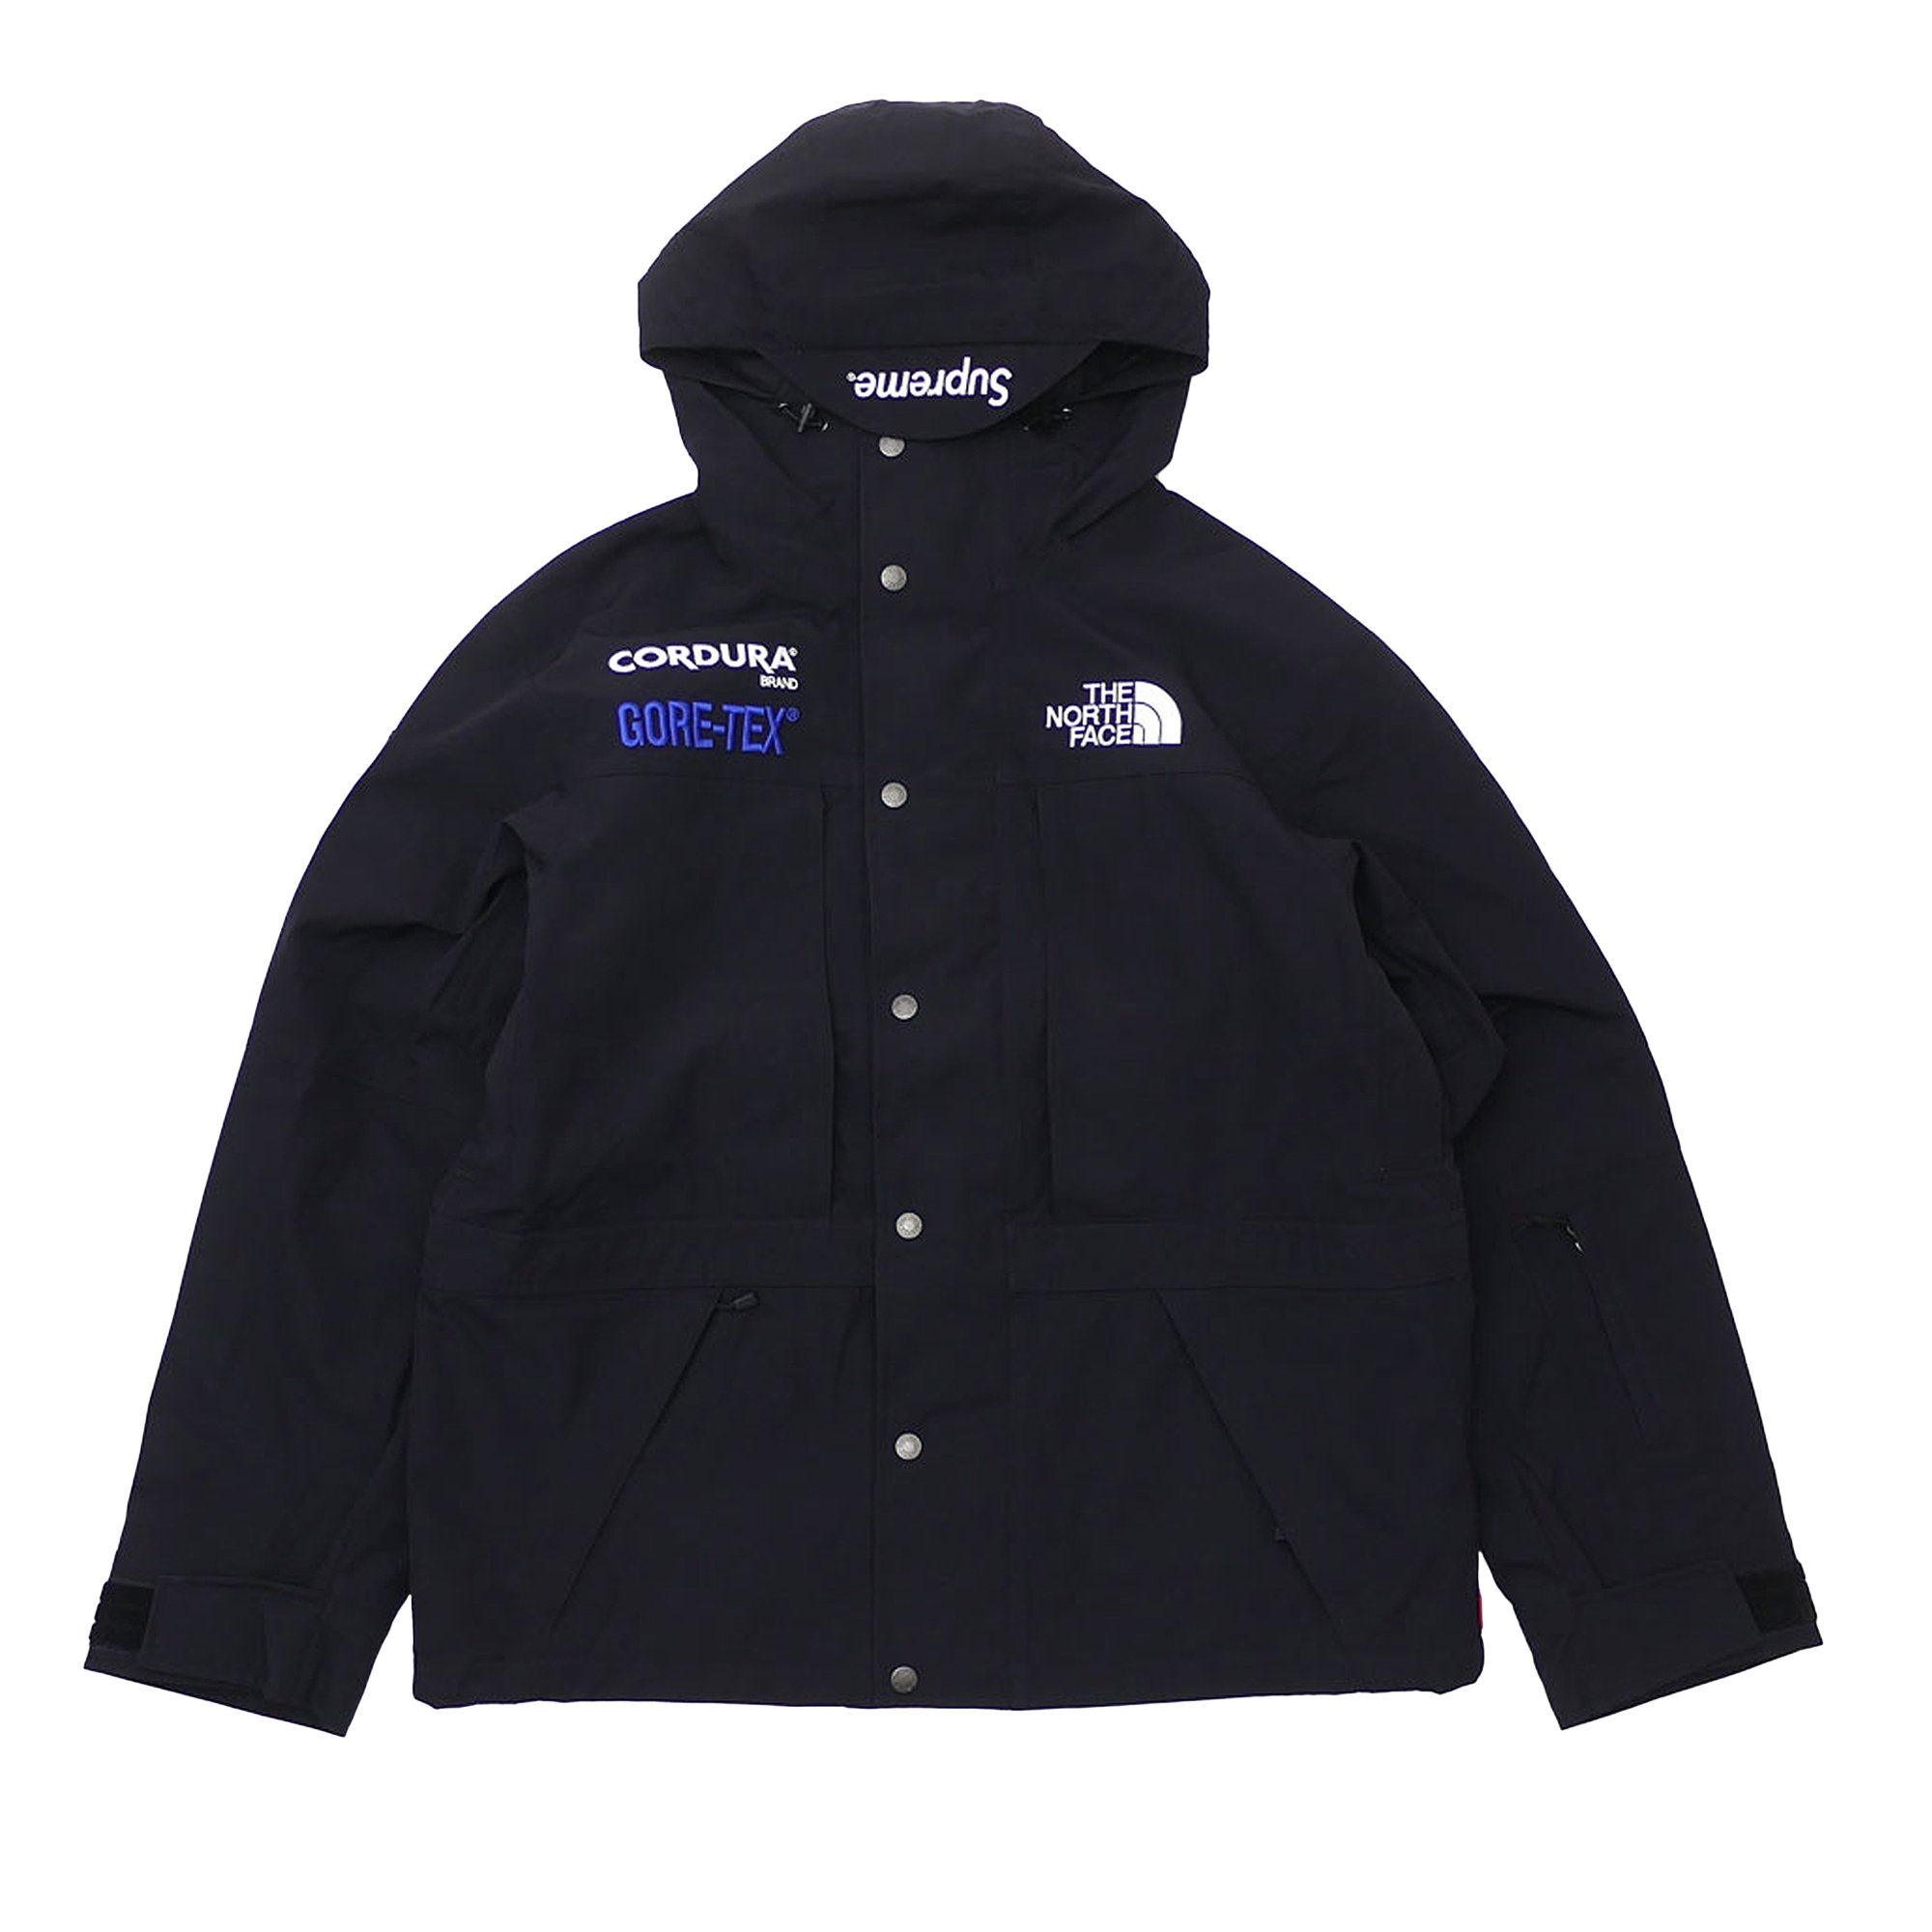 Buy Supreme x The North Face Expedition Jacket 'Black' - FW18J3 